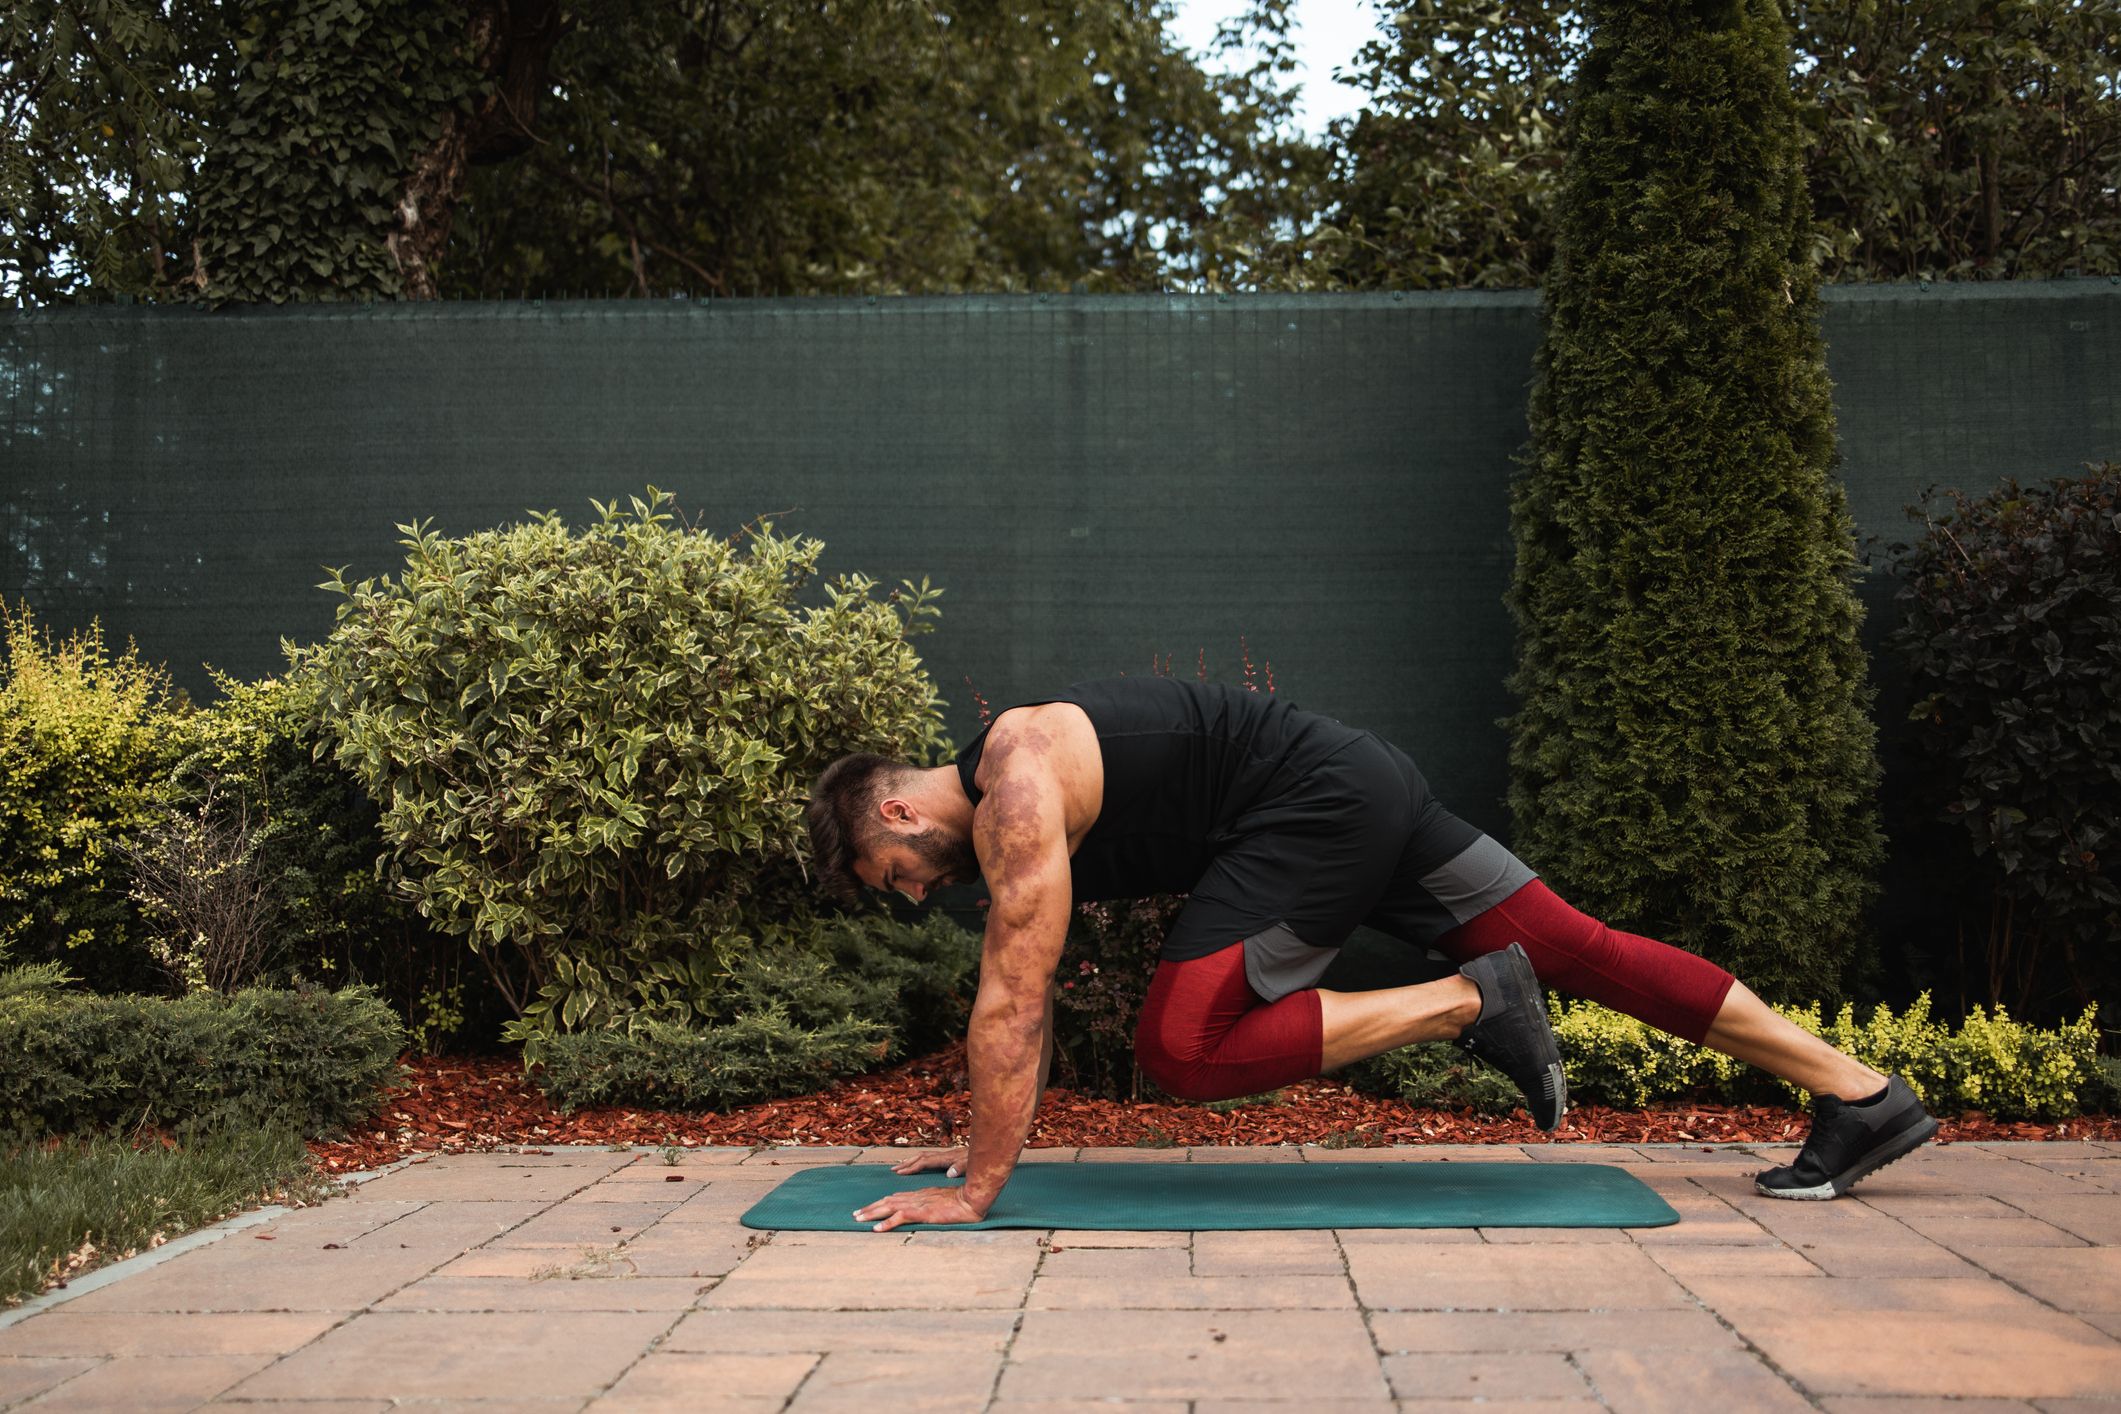 Calisthenics 101: 5 Steps To Follow A Simple Workout Regime at Home